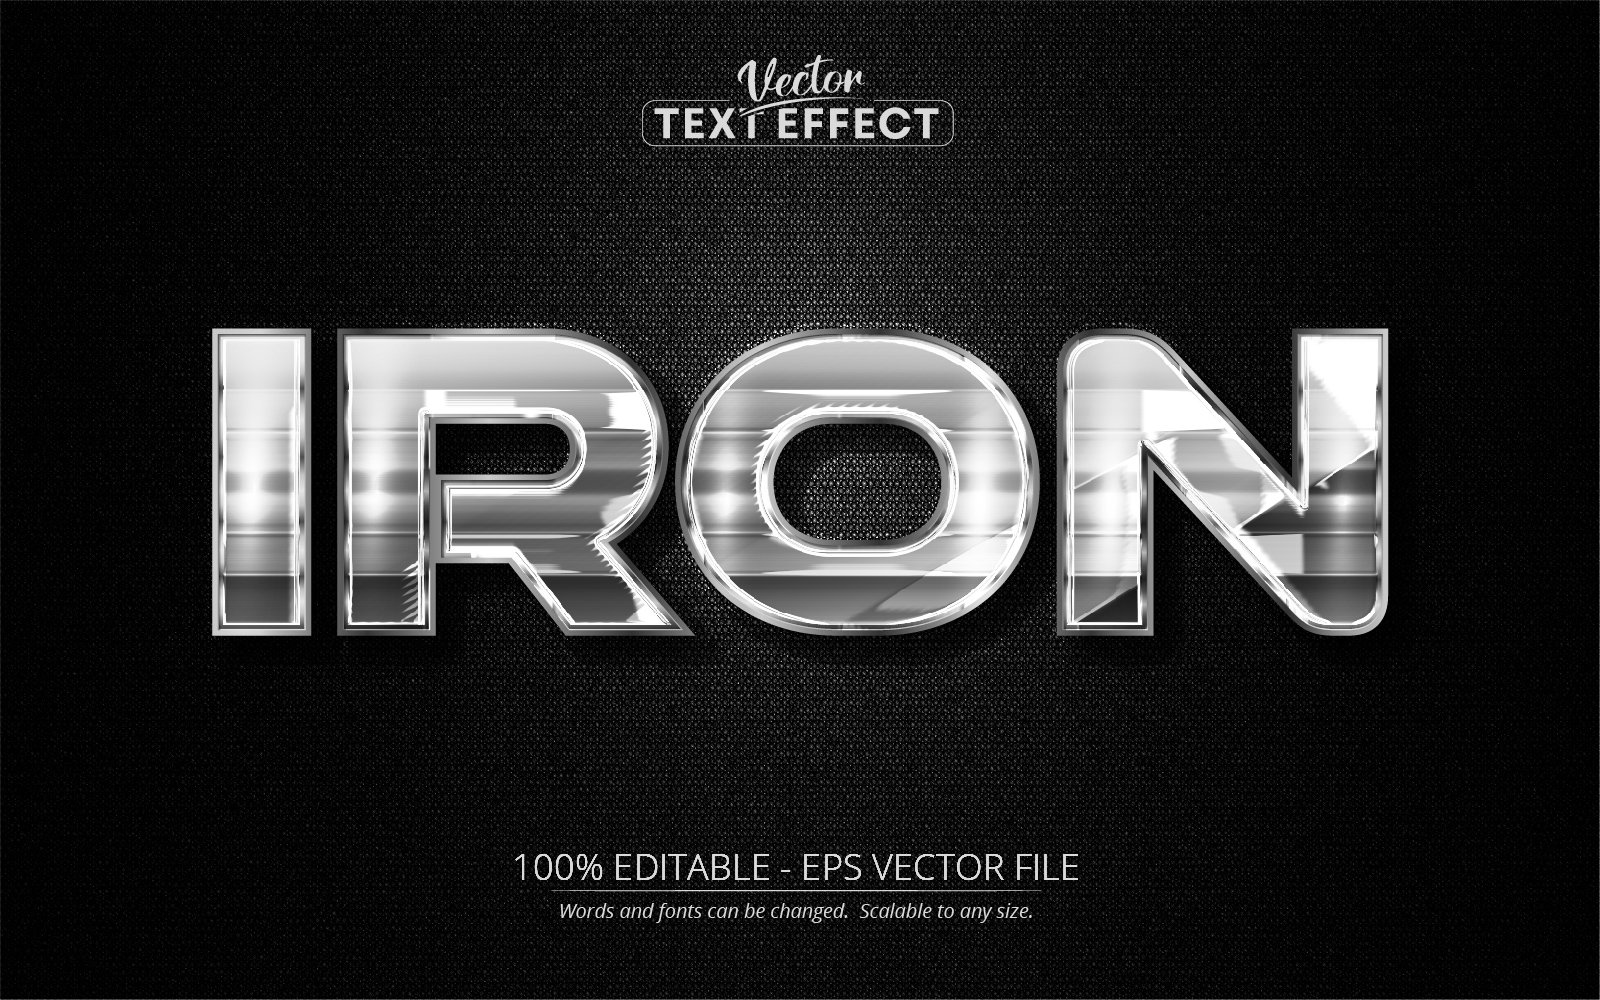 Iron - Editable Text Effect, Metallic And Silver Text Style, Graphics Illustration